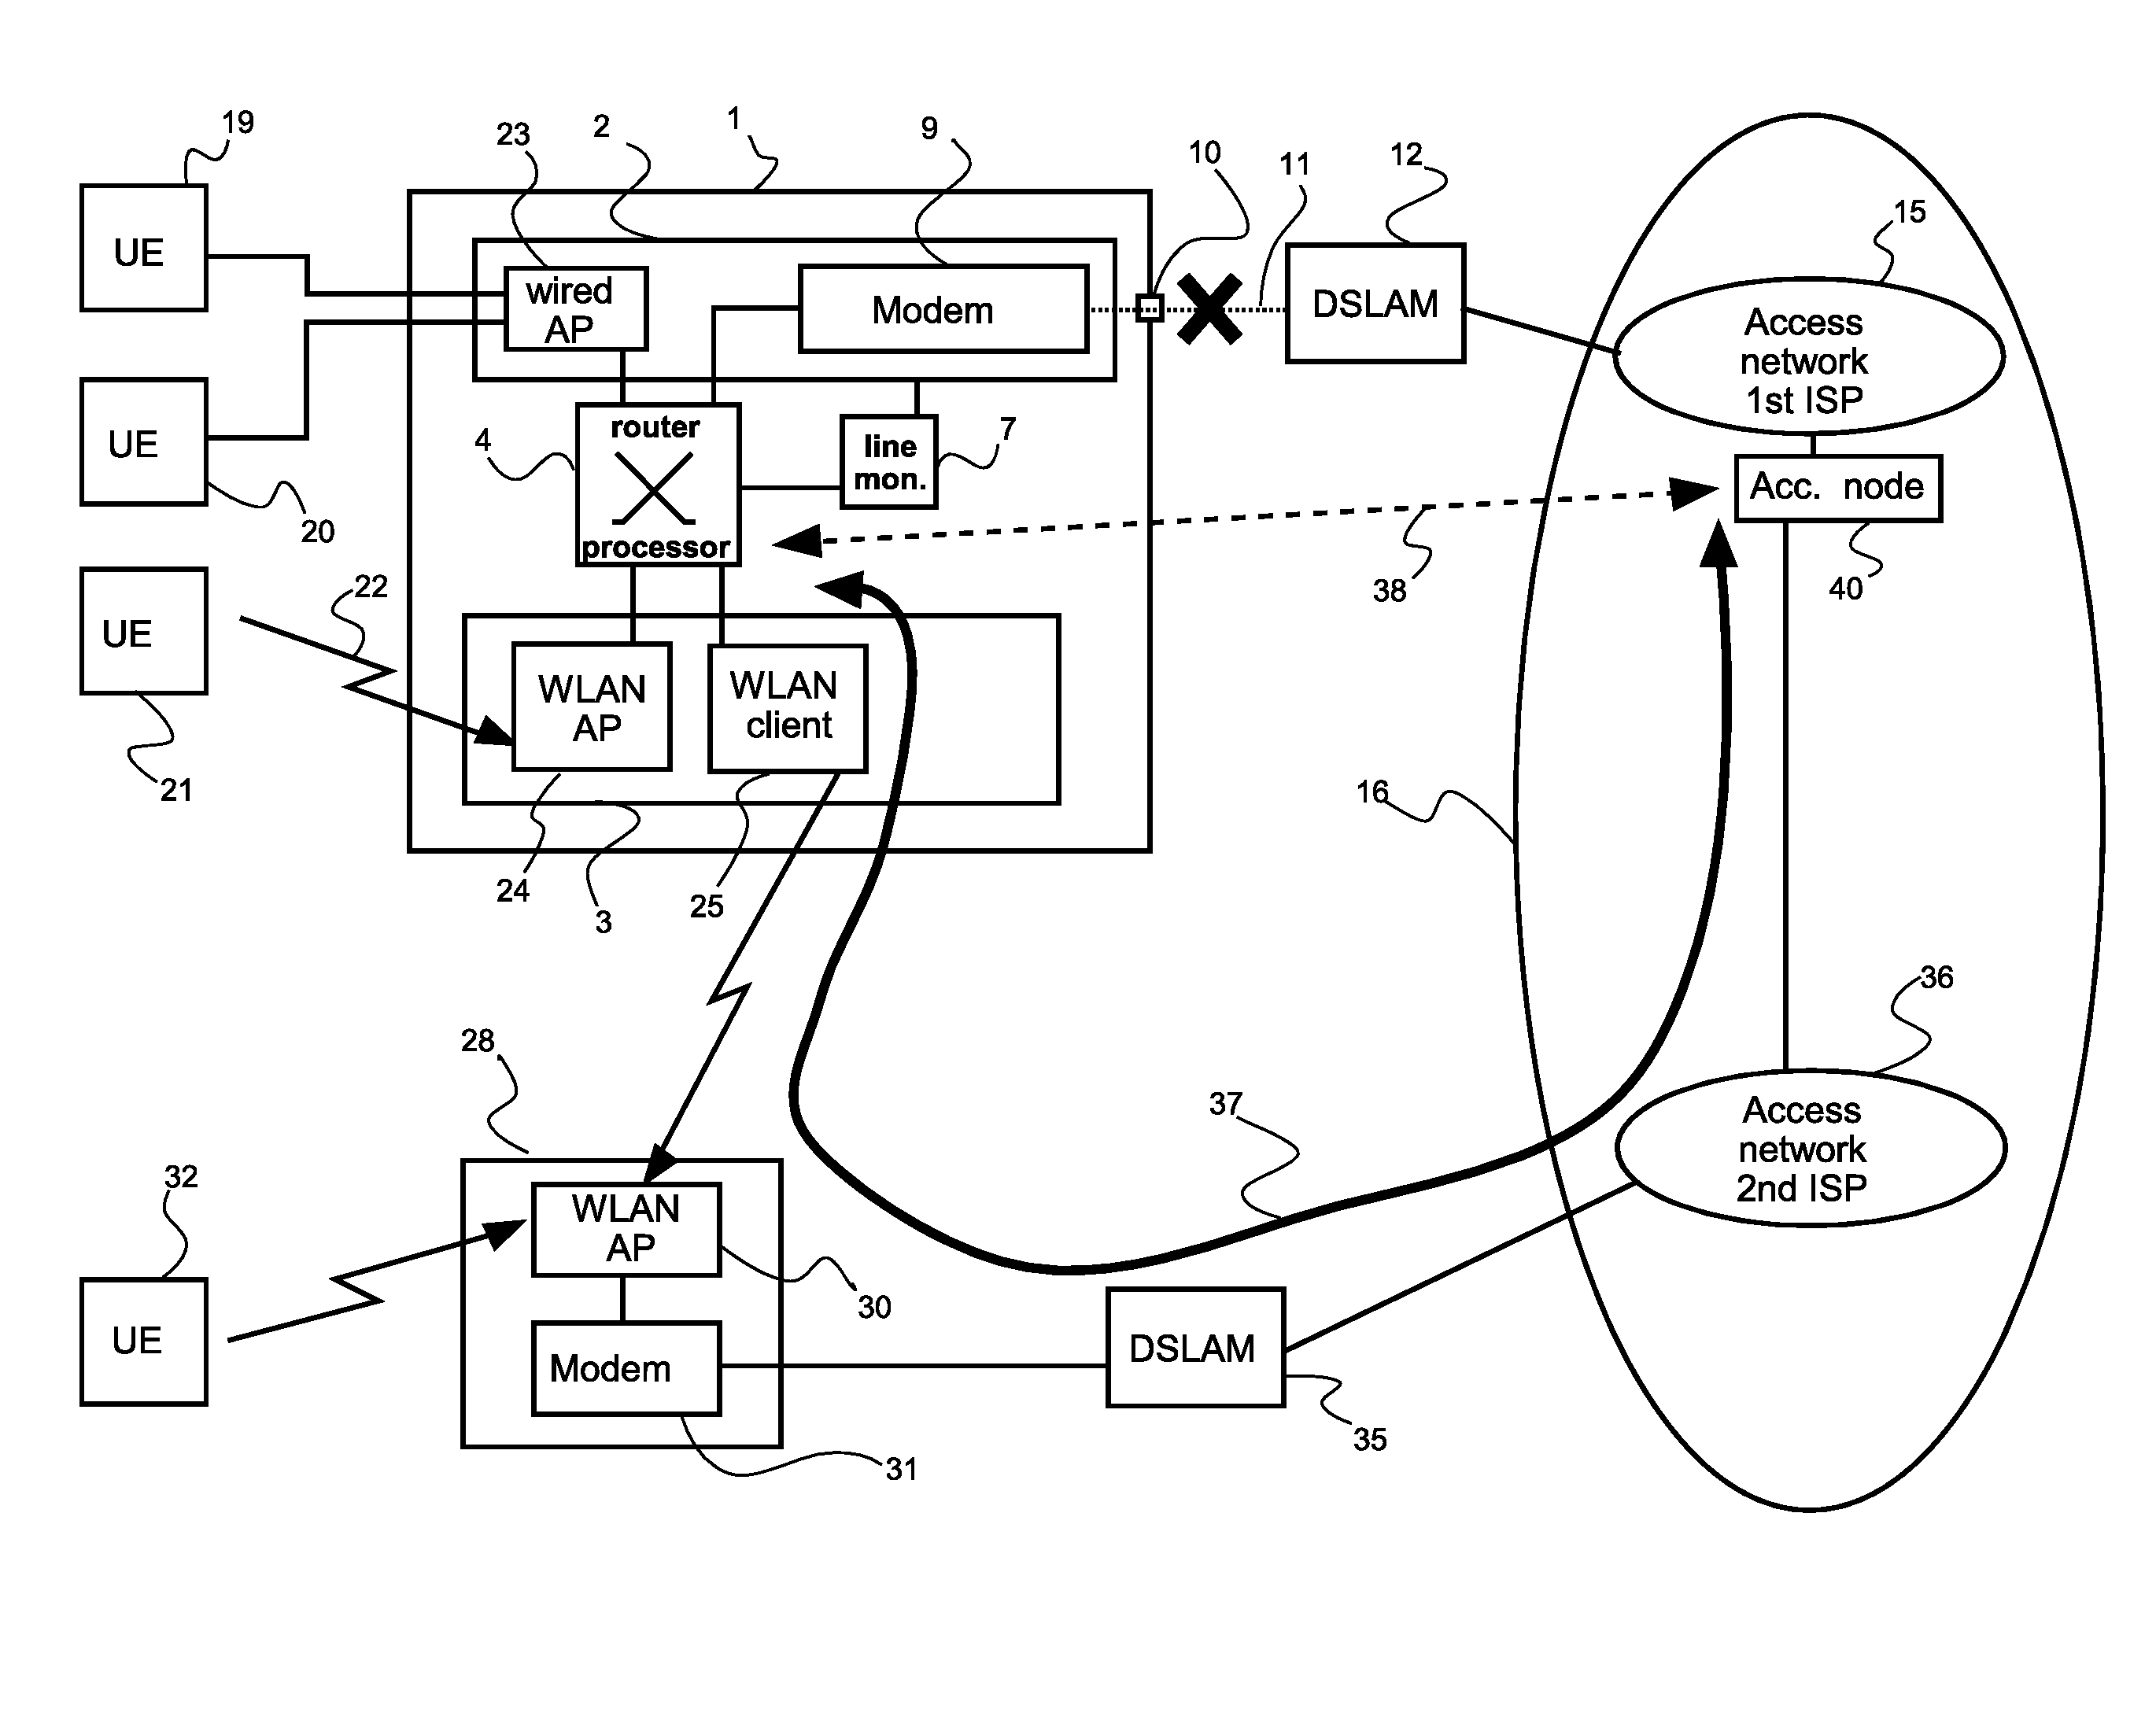 Modem-Router Unit, Access Node, and Method of Enabling Communication with a Packet Switched Network